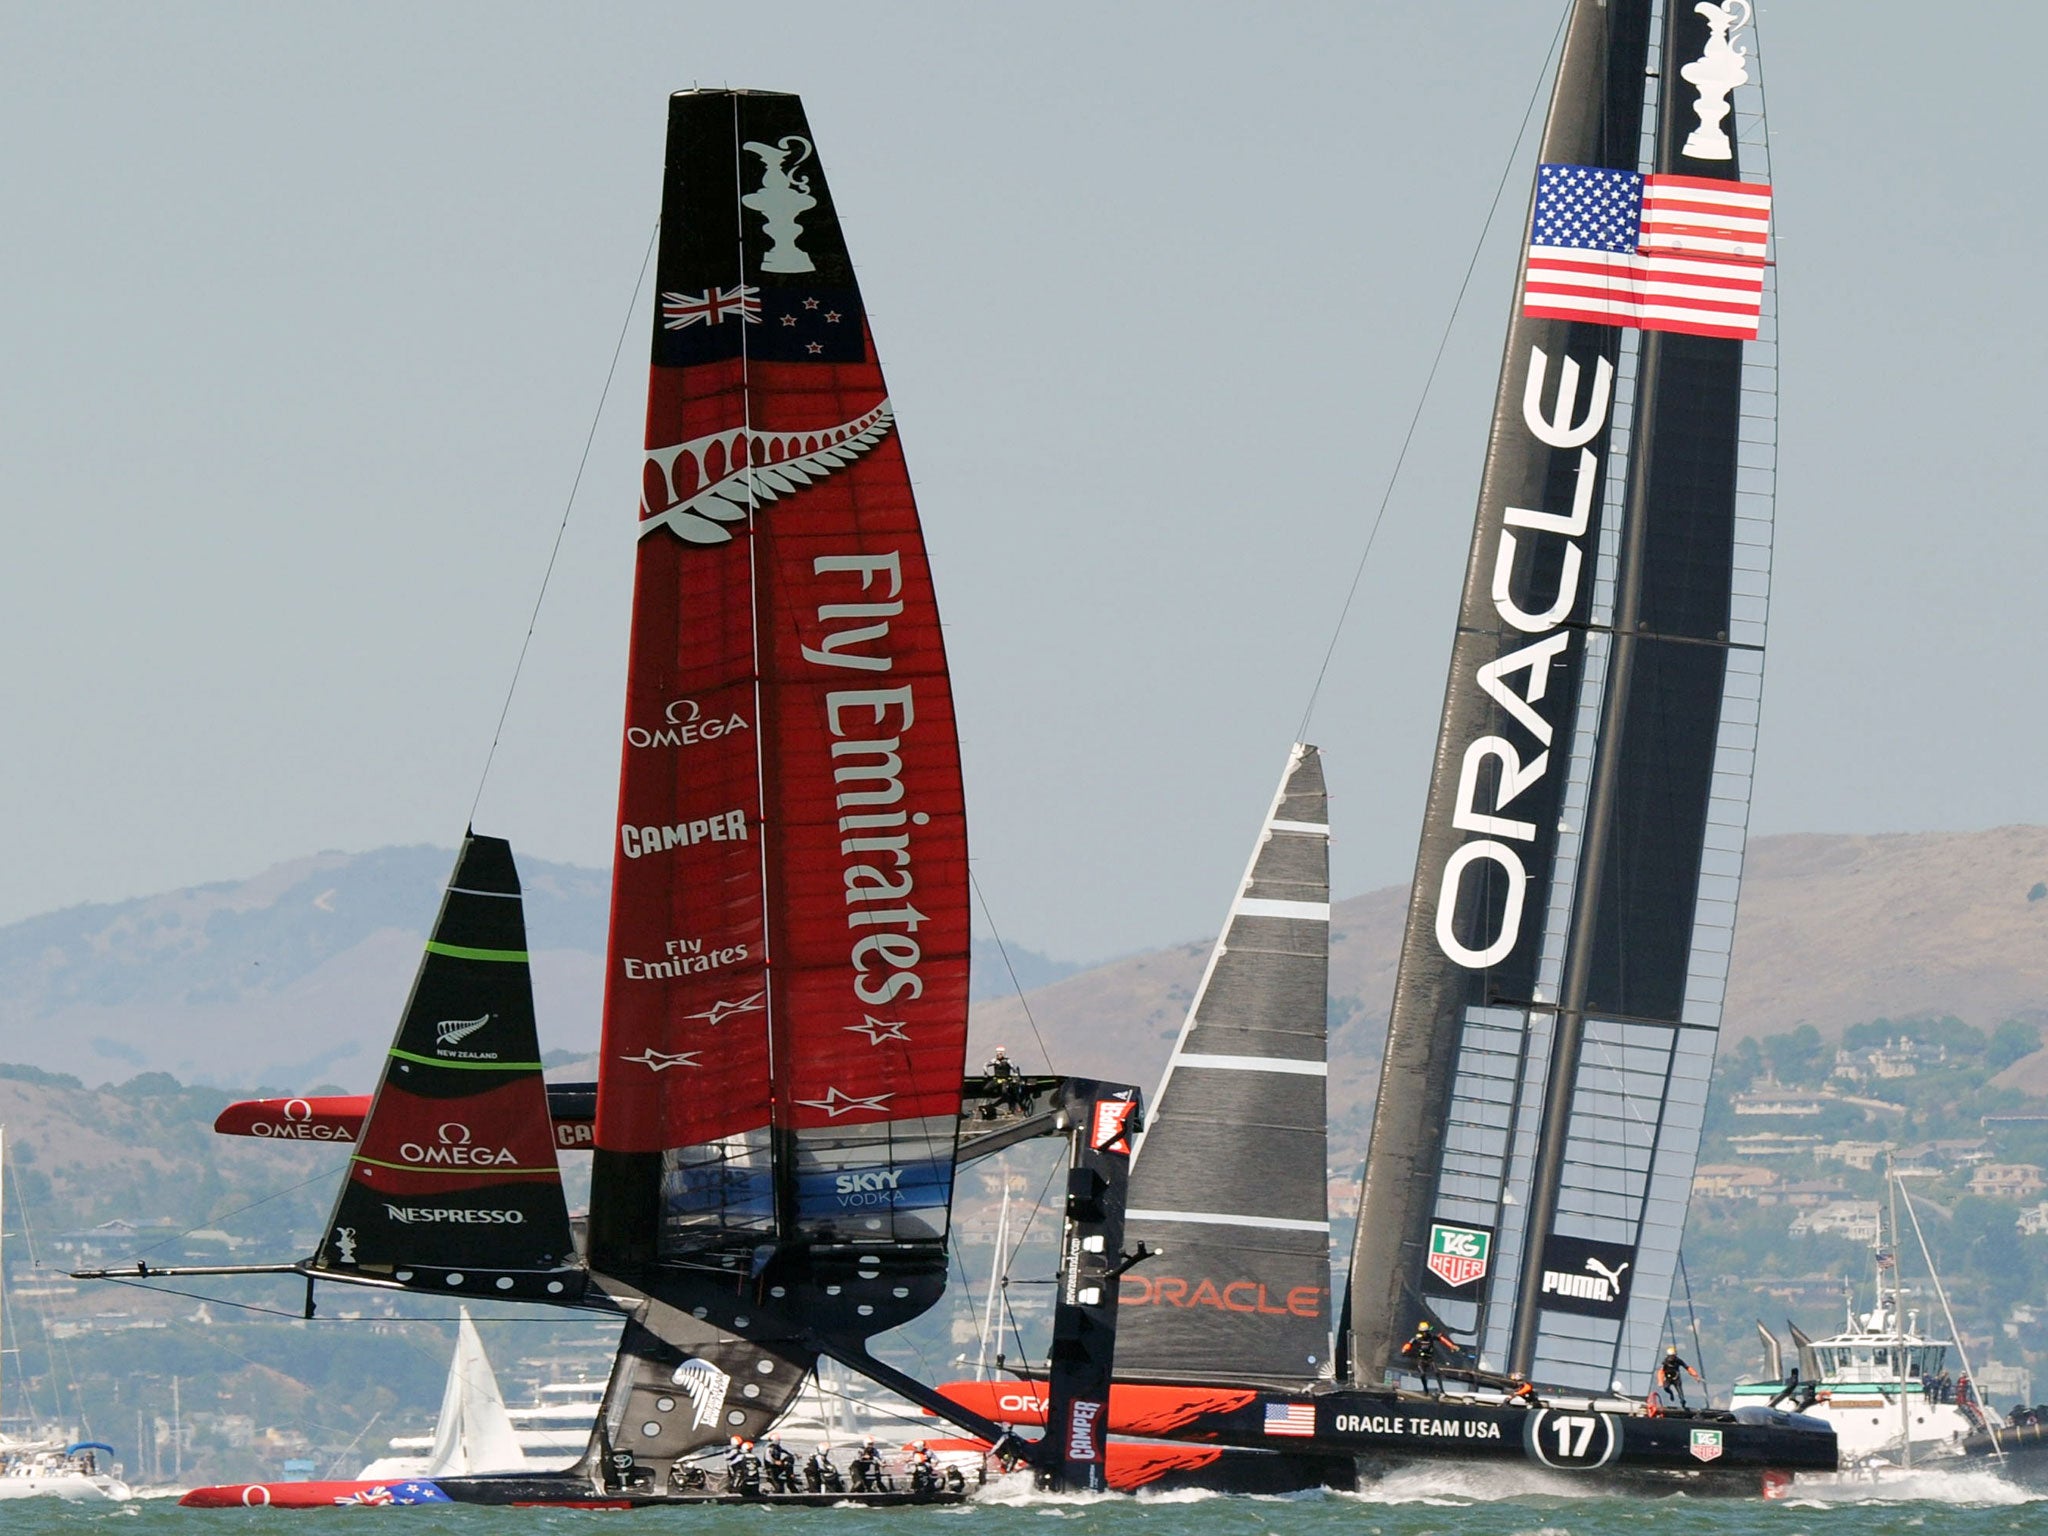 The New Zealanders were lucky to stay upright during an attempt to block an Oracle boat